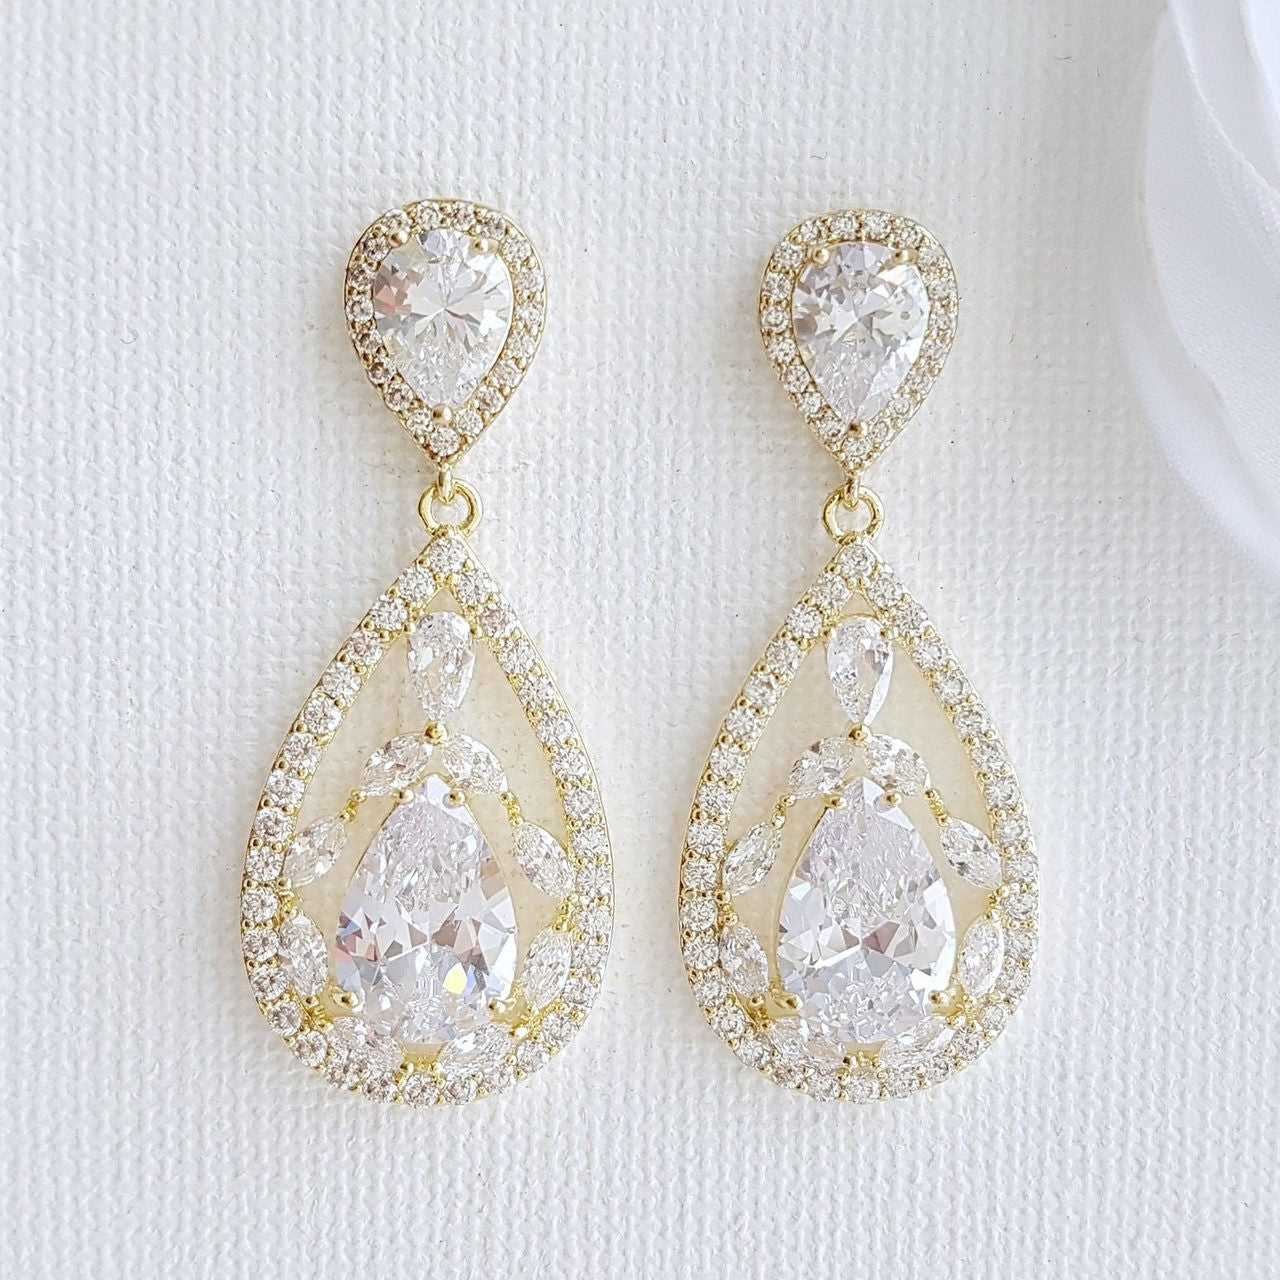 White Pearl Clip on Bridal earrings for a wedding | Bish Bosh Becca